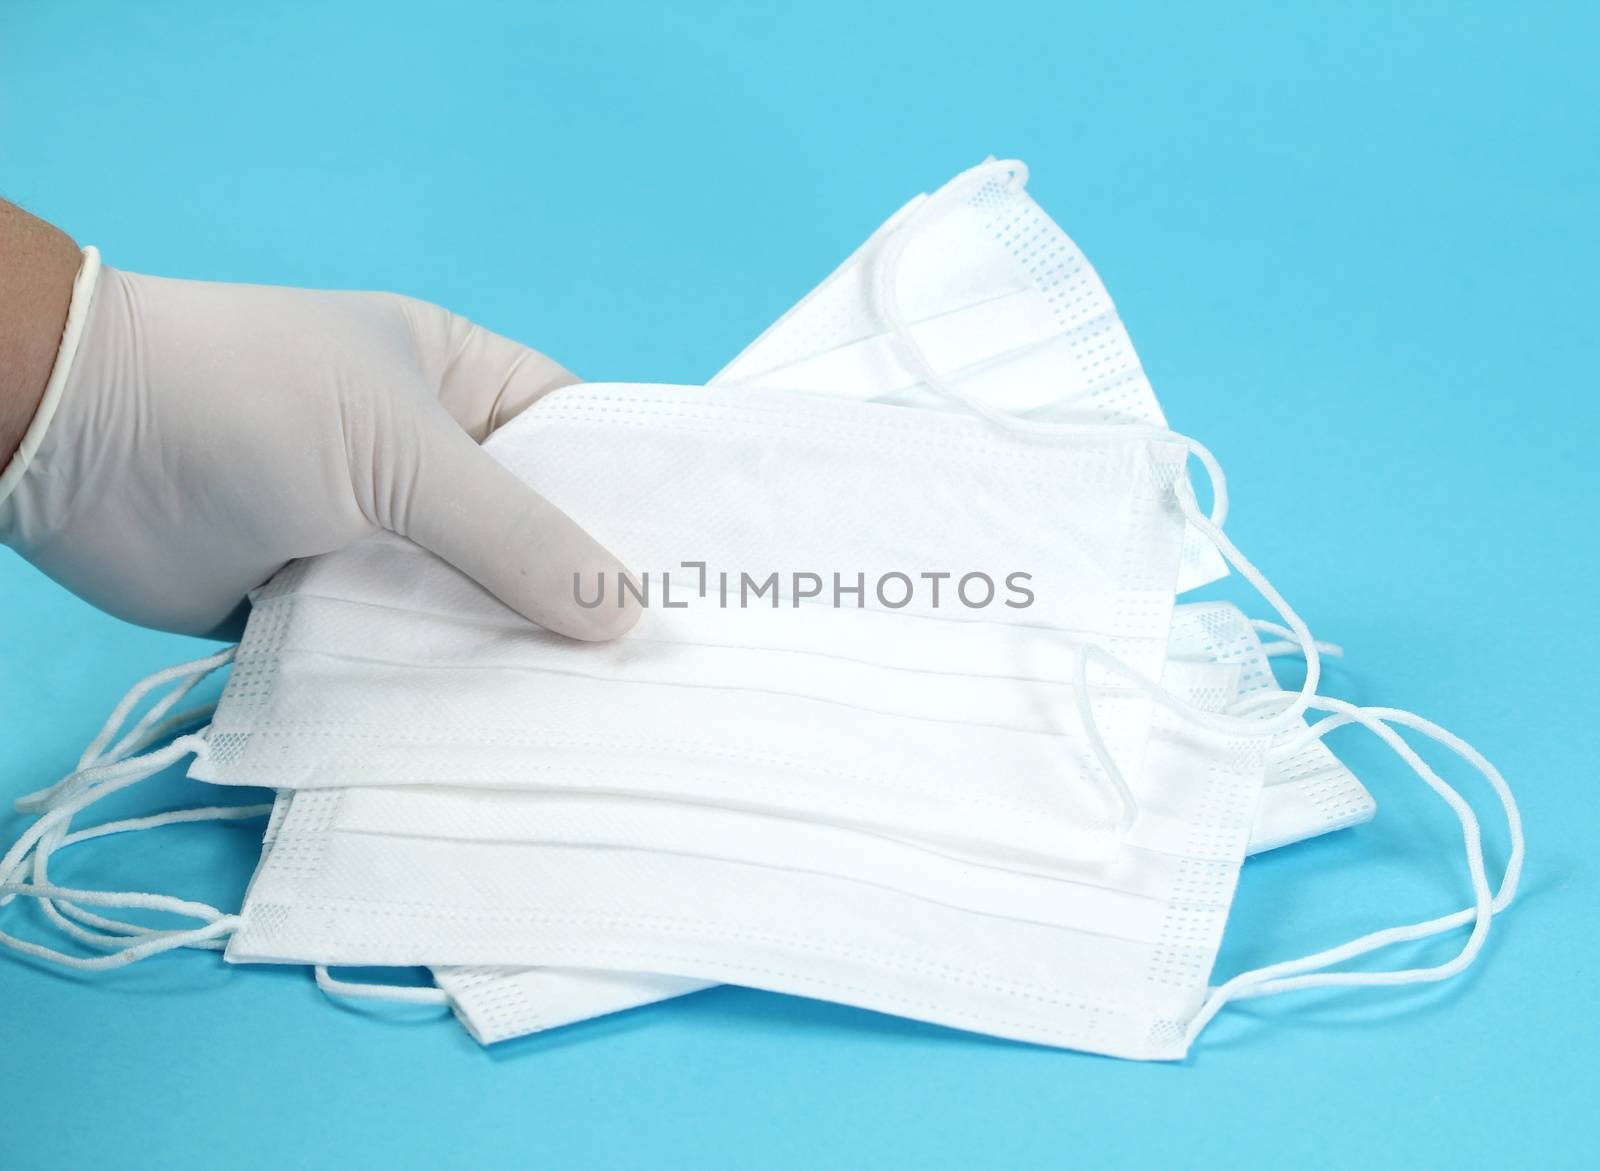 Hand with surgical gloves hanging Disposable Medical masks on blue background. Covid-19 and healthcare concept